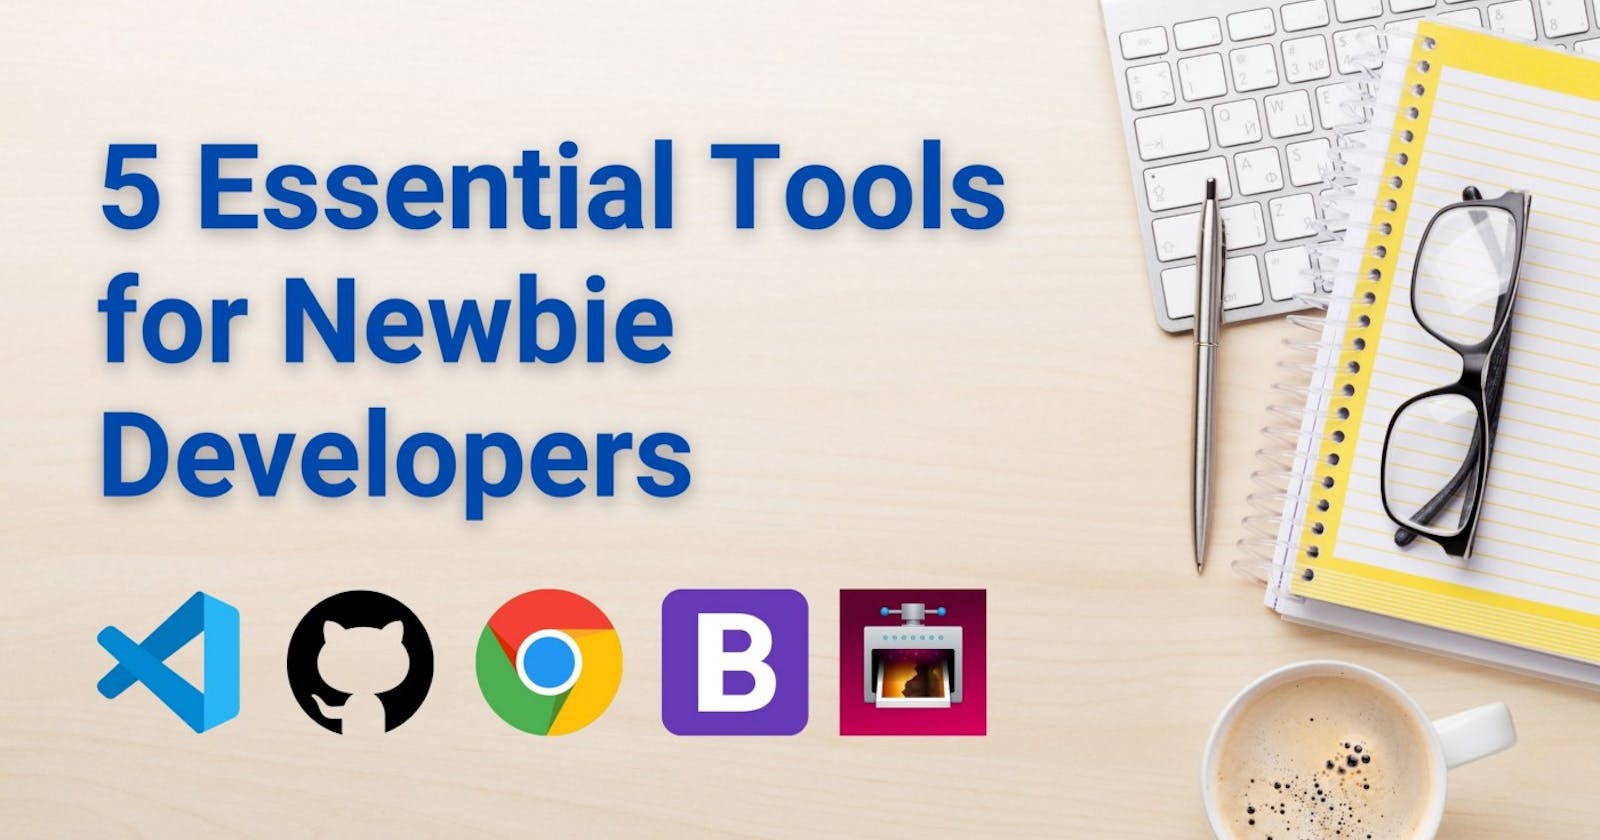 5 Essential Tools Every Developer Should Have in Their Toolbox